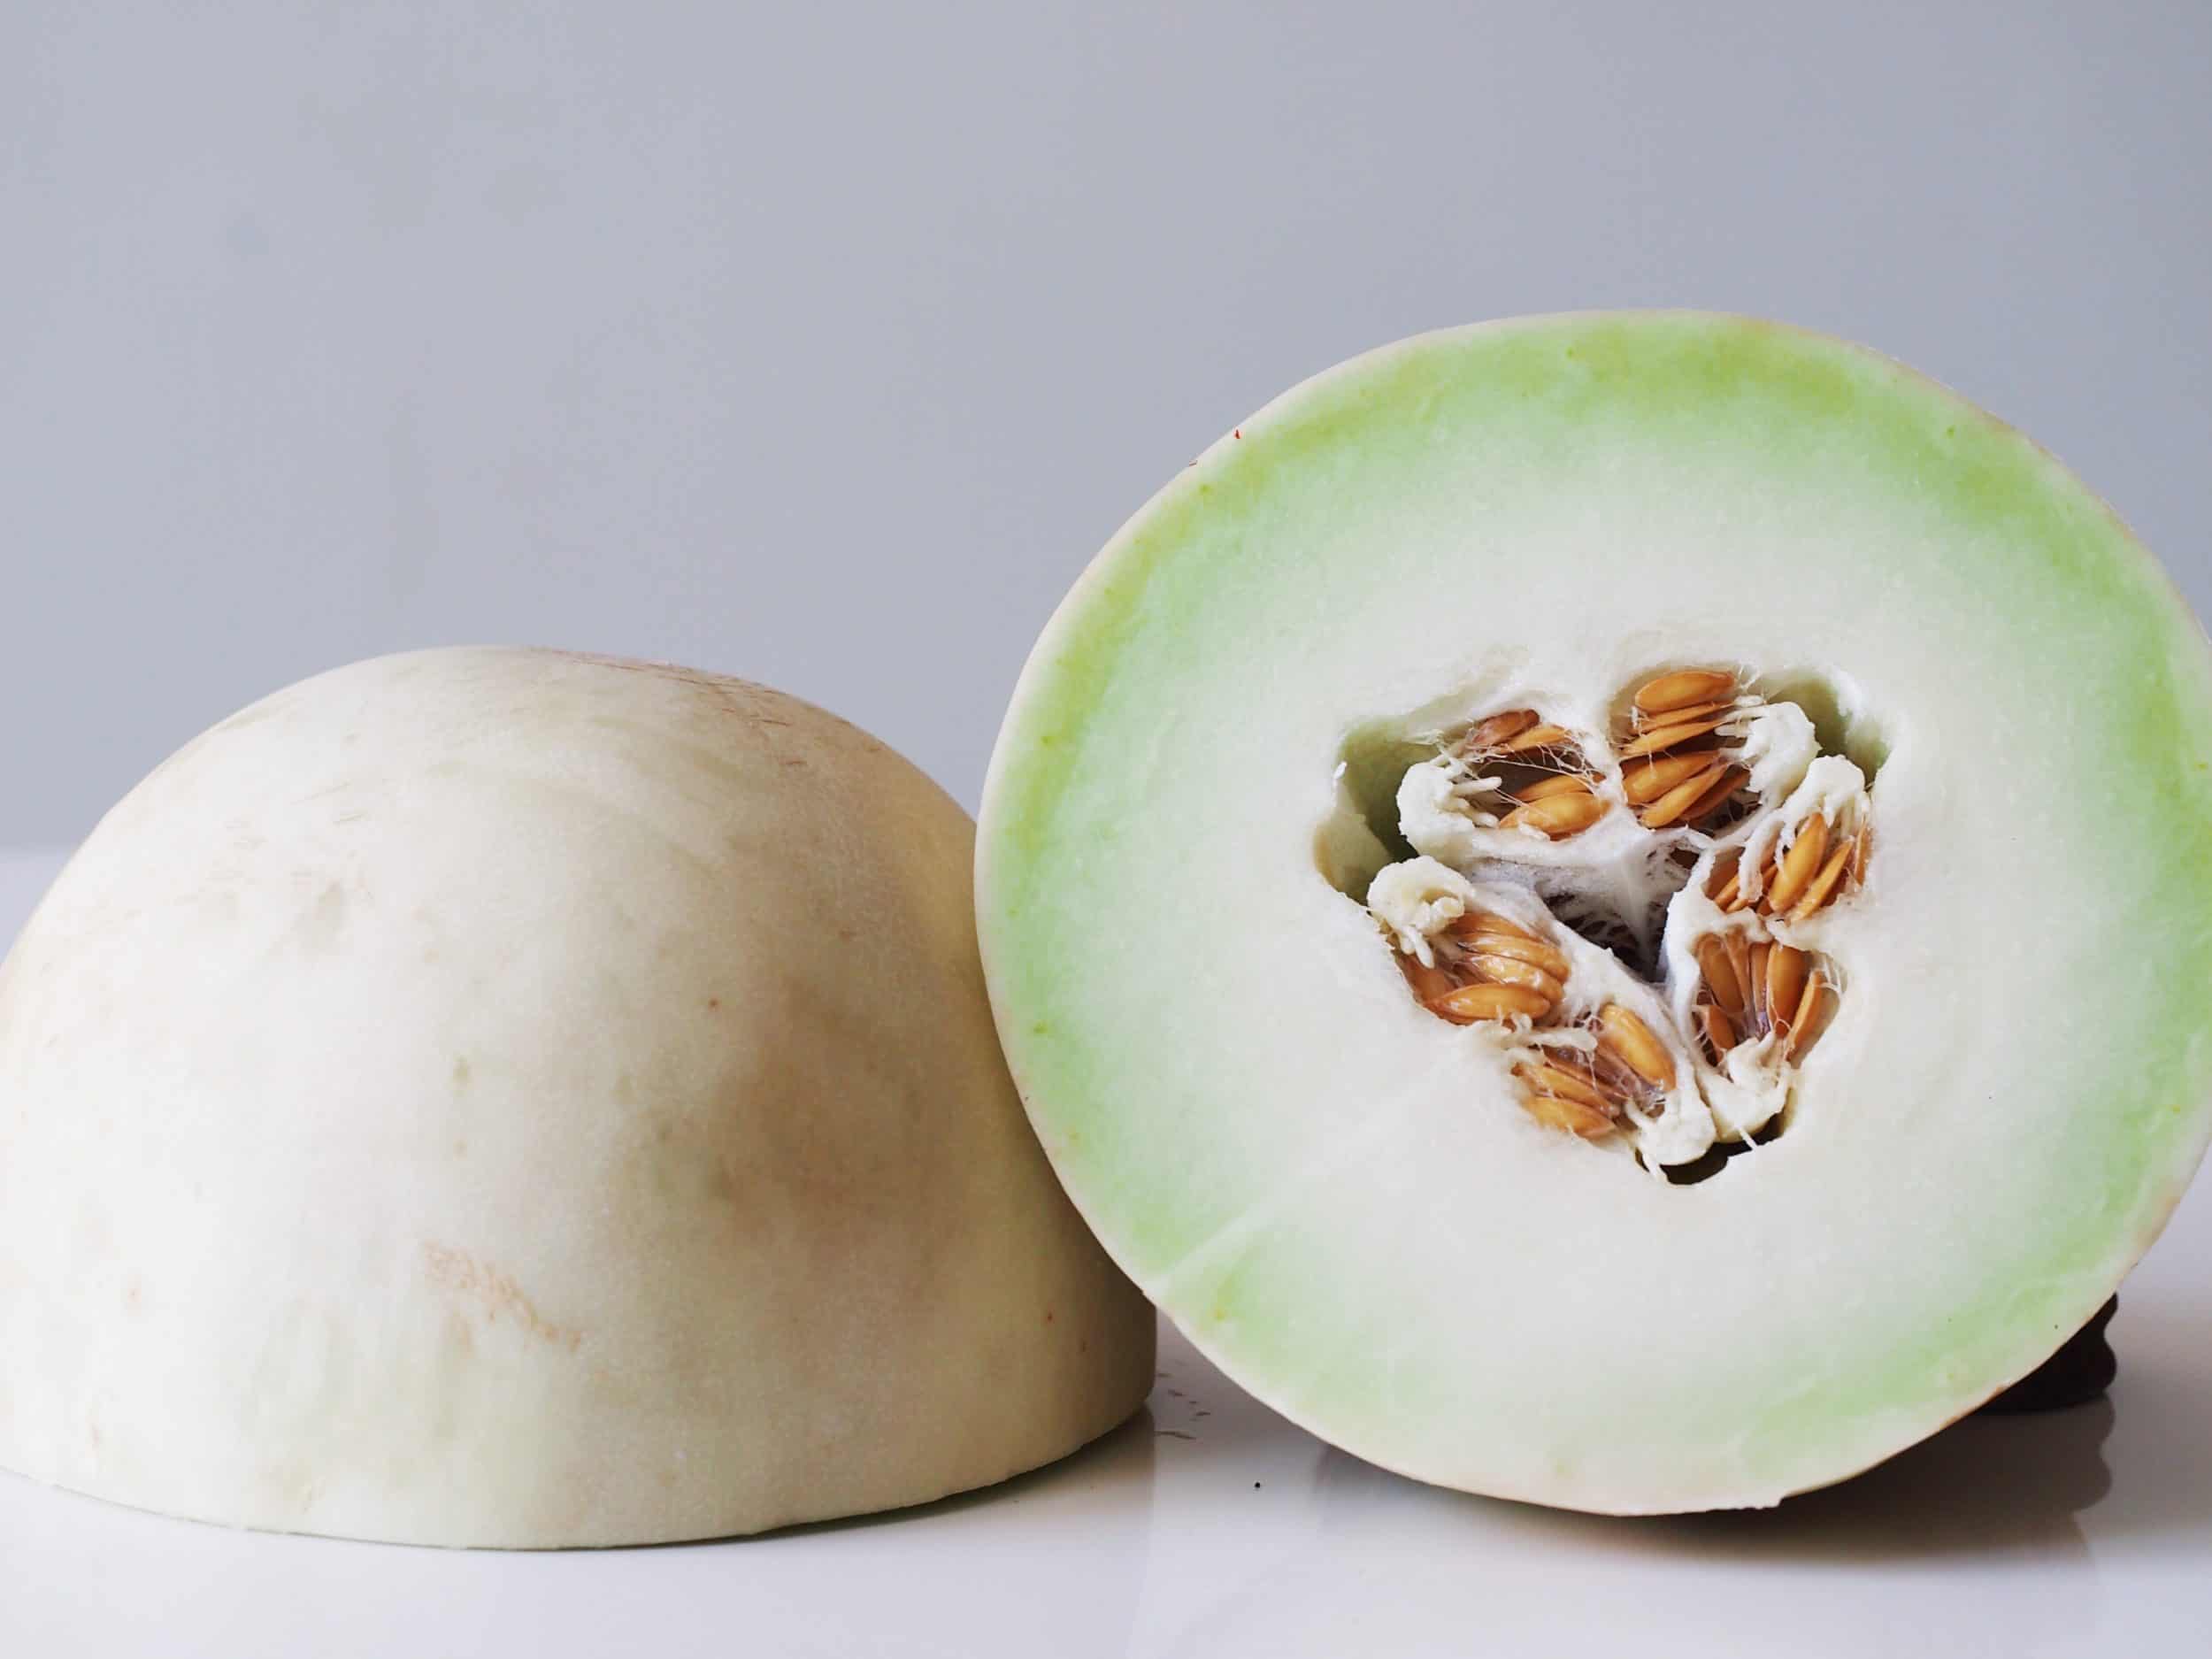 Honeydew Melon - First Foods for Baby - Solid Starts